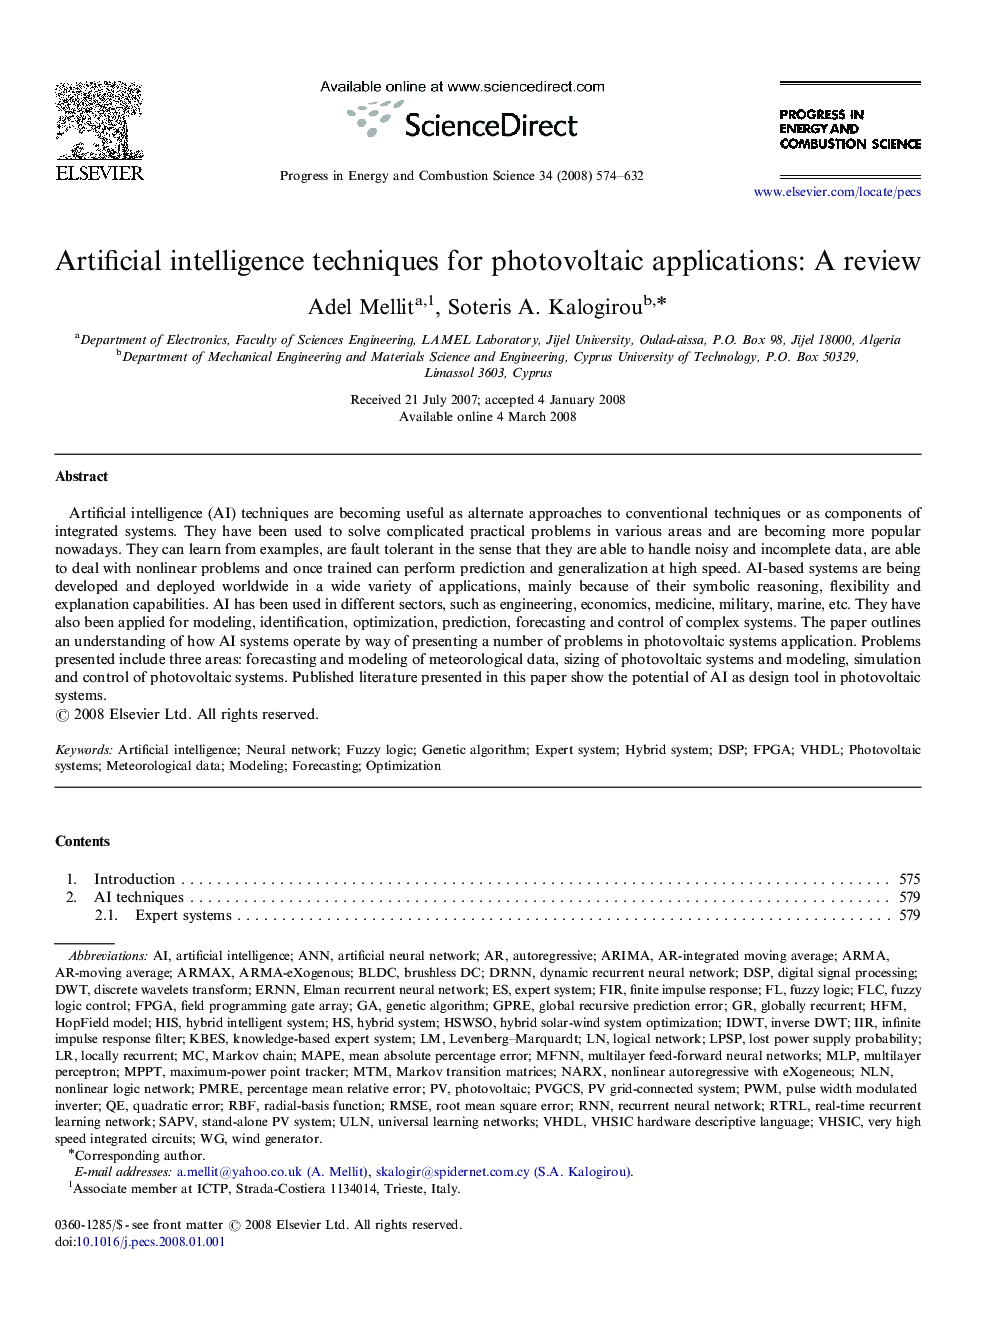 Artificial intelligence techniques for photovoltaic applications: A review